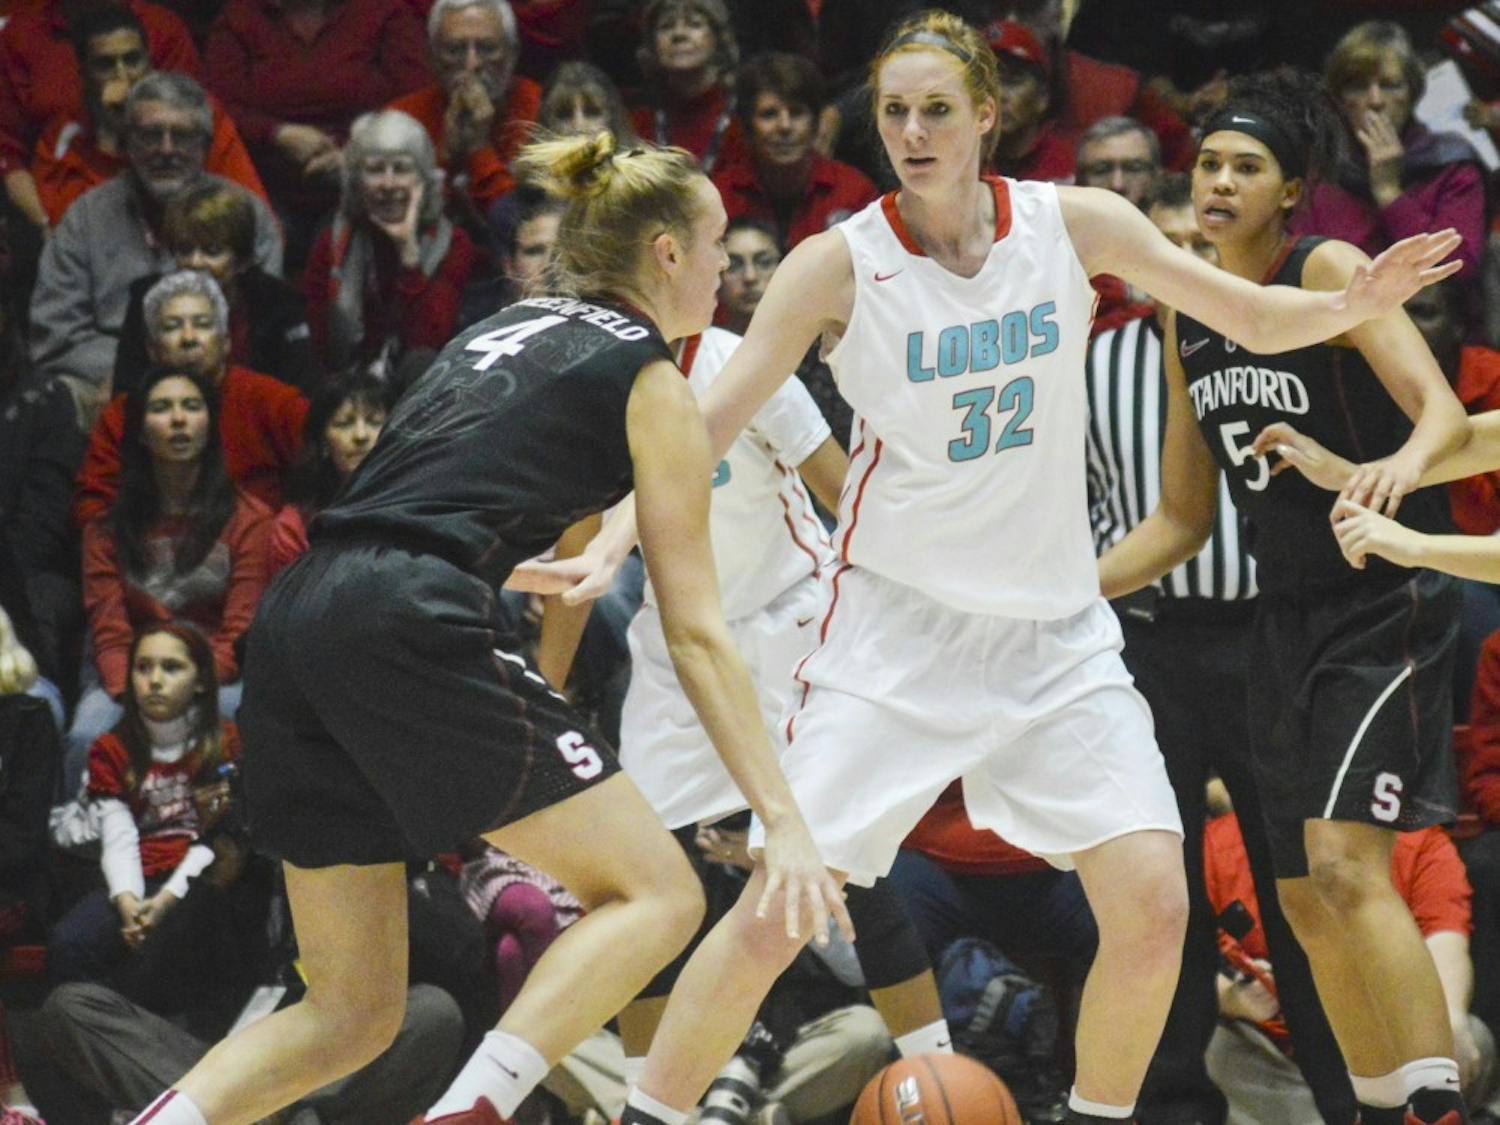 Lobo sophomore forward Kianna Keller, 32, blocks Stanford forward Taylor Greenfield during the game against Stanford on Nov. 24. The Lobos lost to New Mexico State University in Las Cruces 70-59 on Sunday.